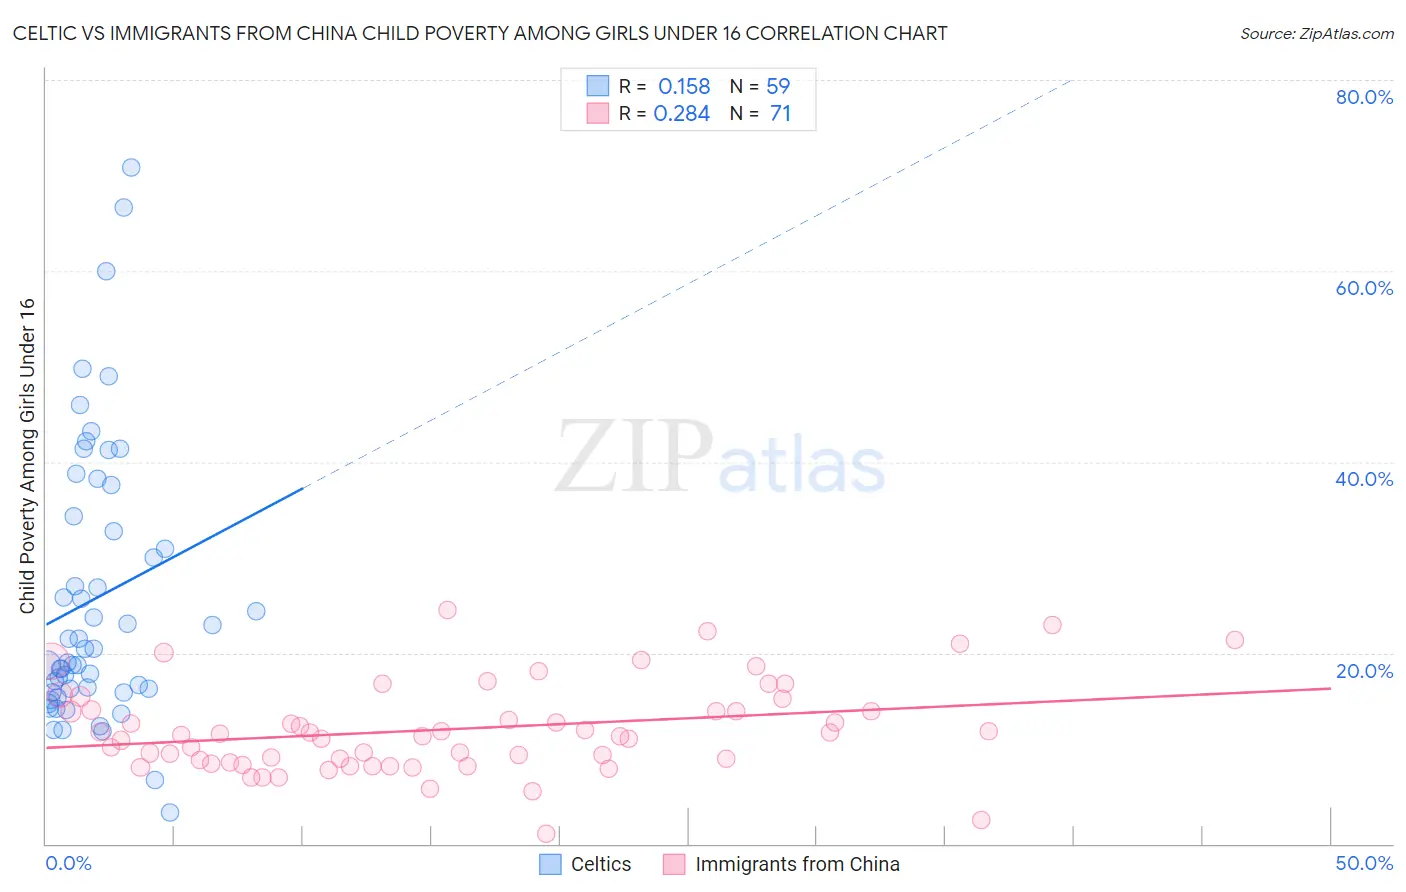 Celtic vs Immigrants from China Child Poverty Among Girls Under 16